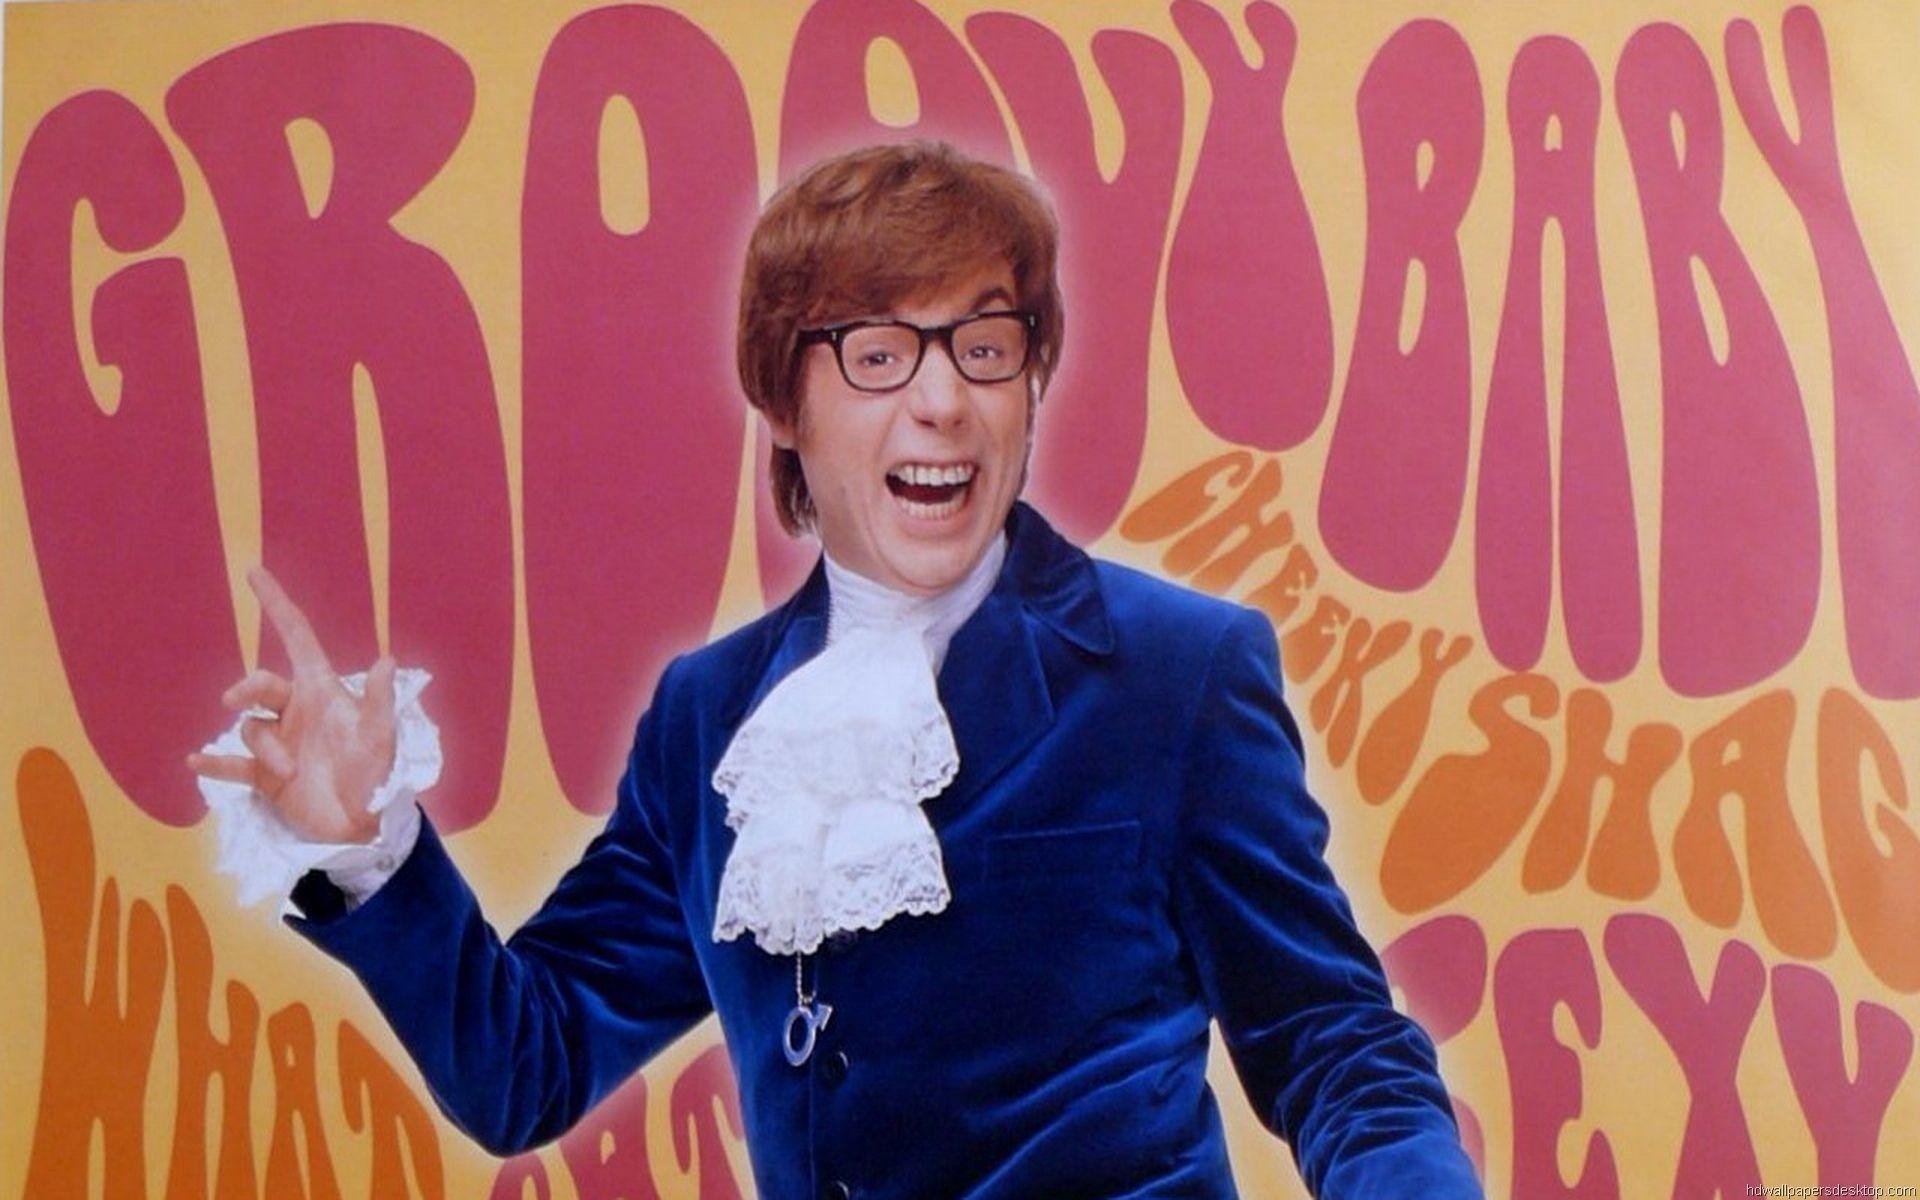 Austin Powers Background Picture to